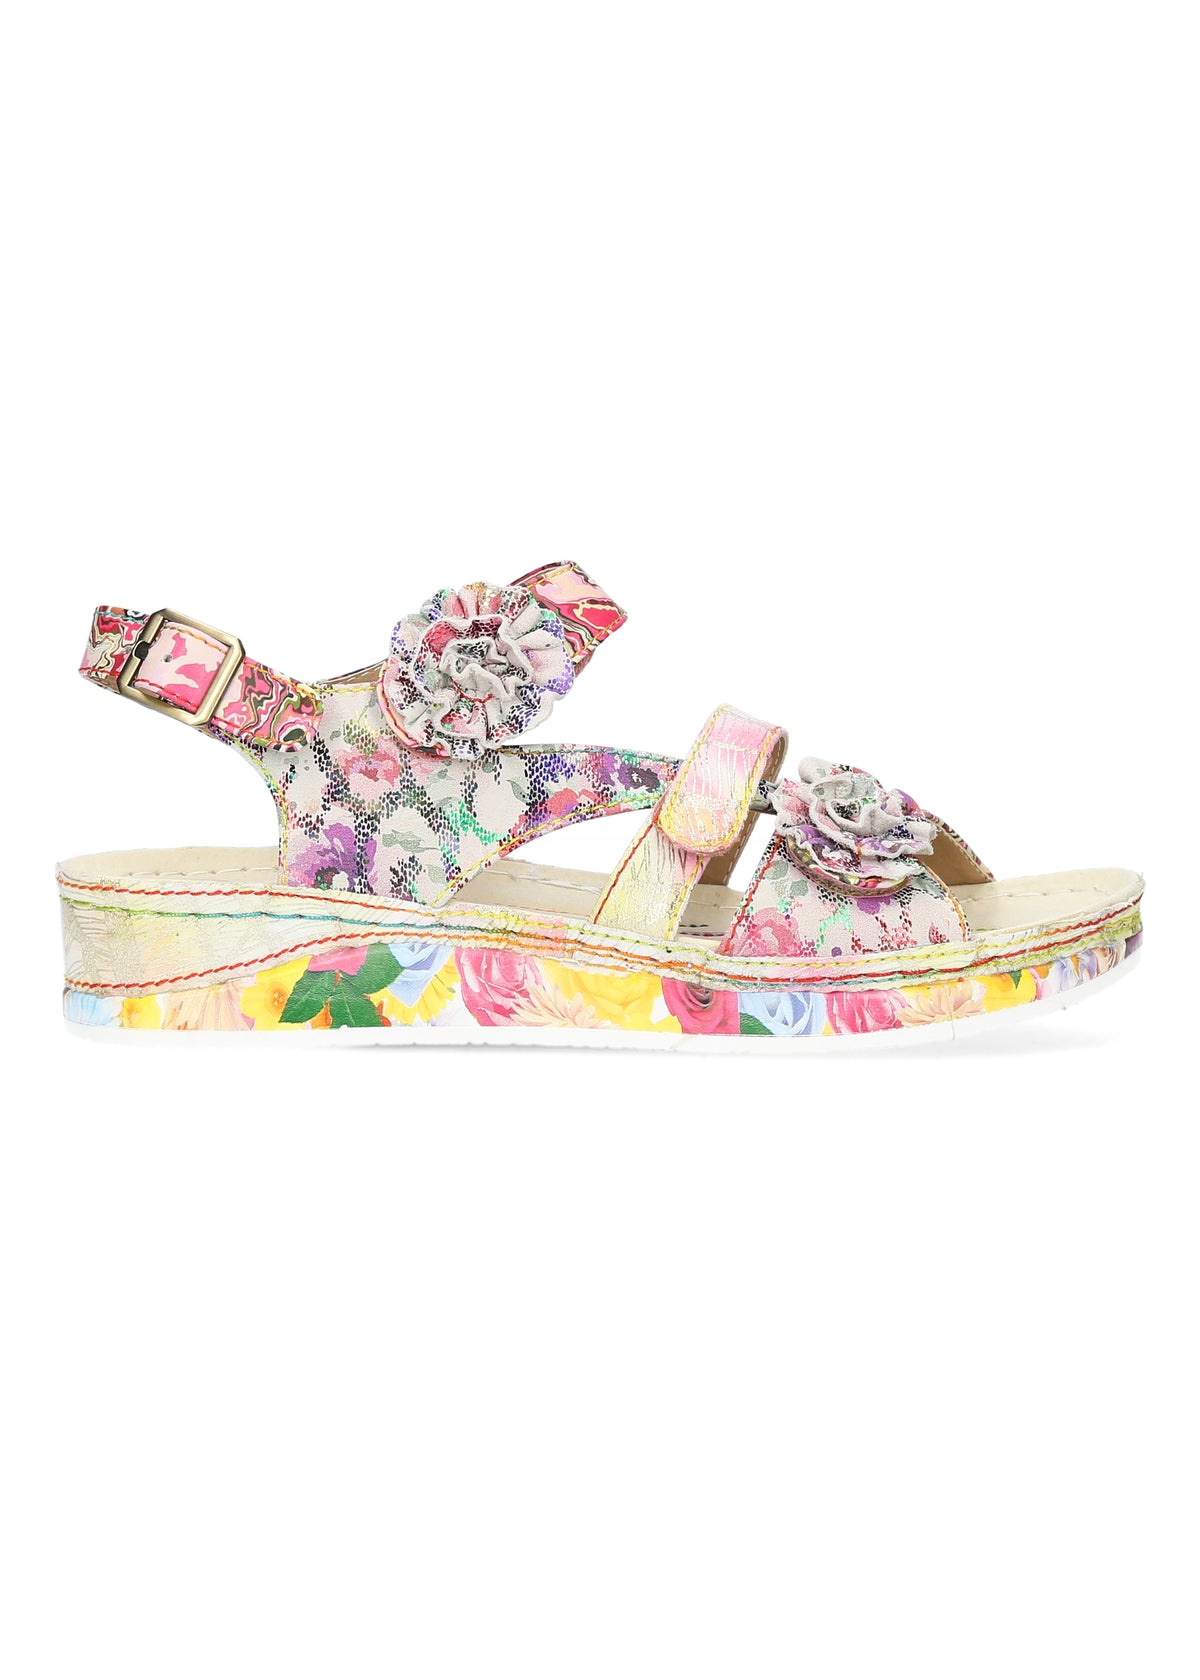 Sandals - Brcuelo 06, multi-colored pattern with pink hue, flower decorations